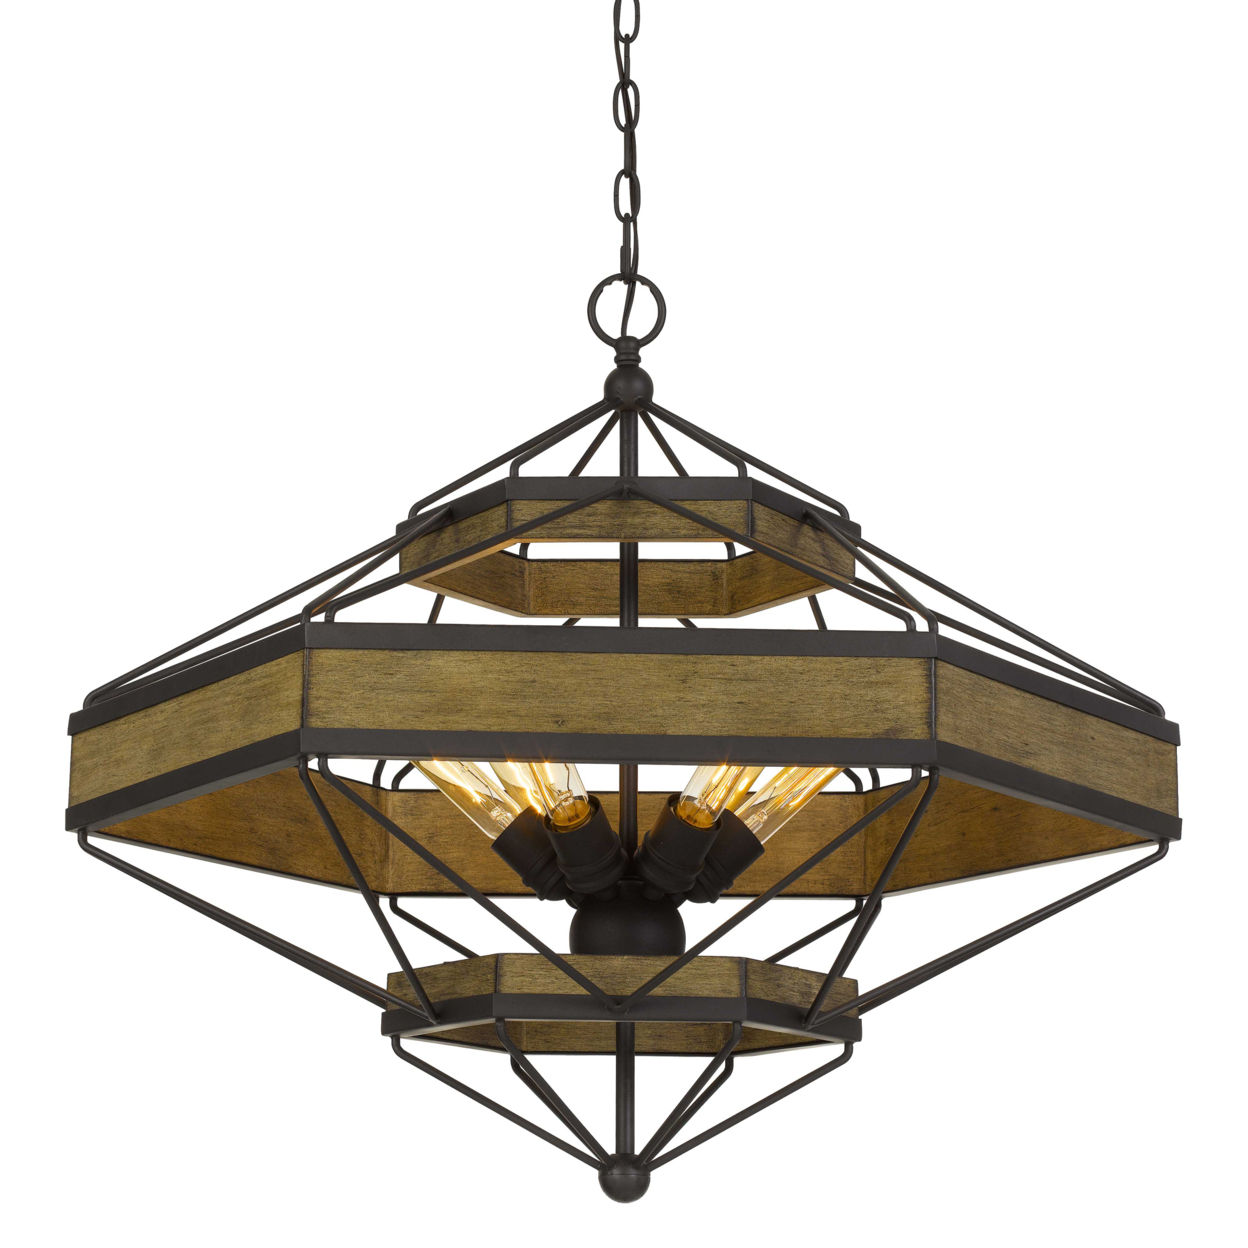 6 Bulb Chandelier With Hexagonal Metal And Wooden Frame, Brown And Bronze- Saltoro Sherpi